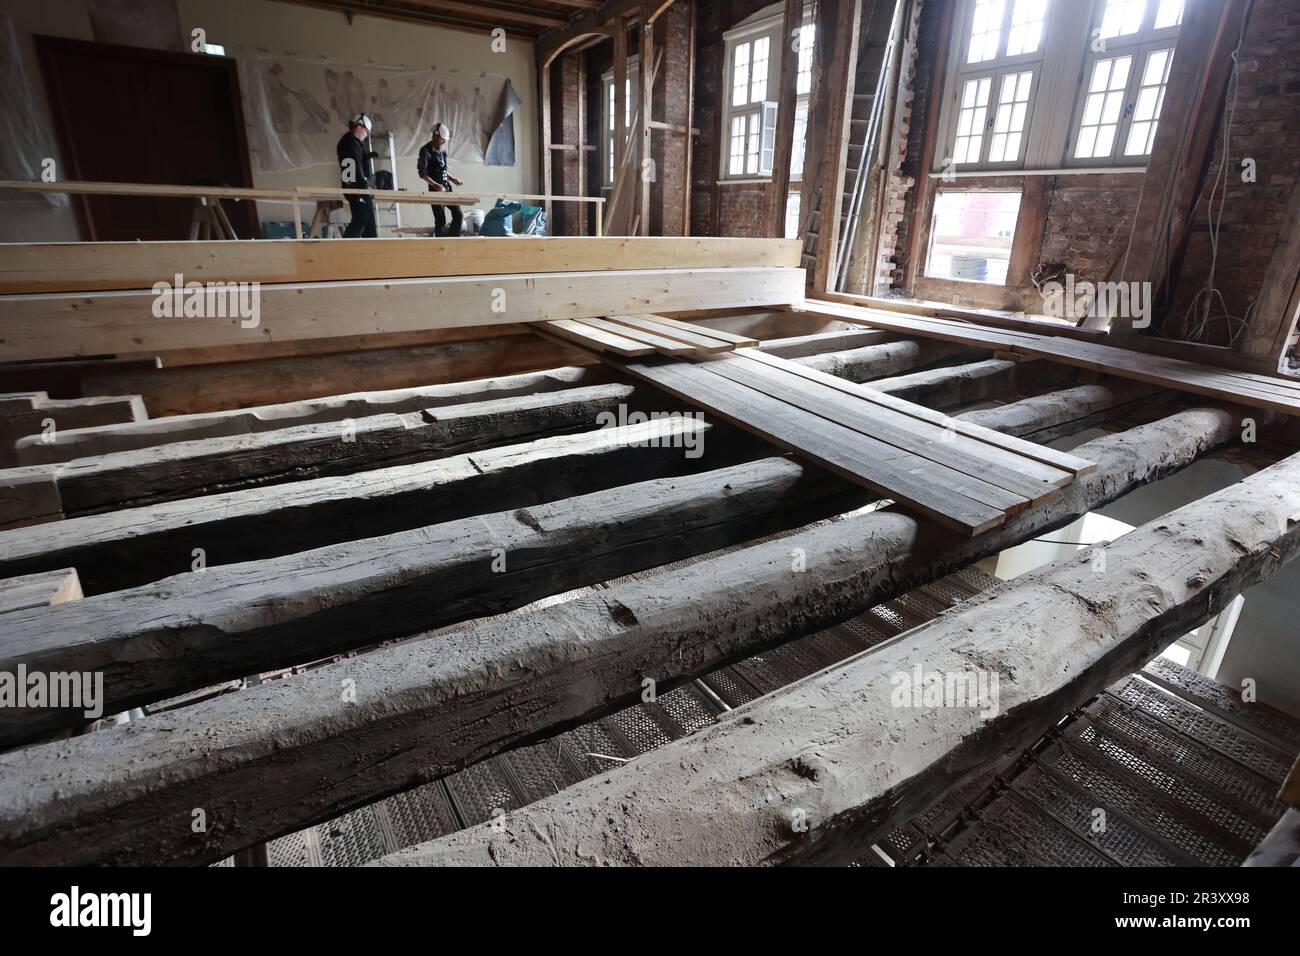 25 May 2023, Saxony-Anhalt, Wernigerode: View into the gutted large ballroom of the Wernigerode town hall. The historic town hall is currently being renovated in accordance with the preservation order. In the area of the hall, considerable vibrations of the floor were noticed. When the ceiling below was opened, it was found that the existing construction (spacing and span of the ceiling beams) was too weak for the intended use. Therefore, a structural reinforcement of the ceiling beams is mandatory. The implementation of the necessary construction measures is to be carried out in five individu Stock Photo